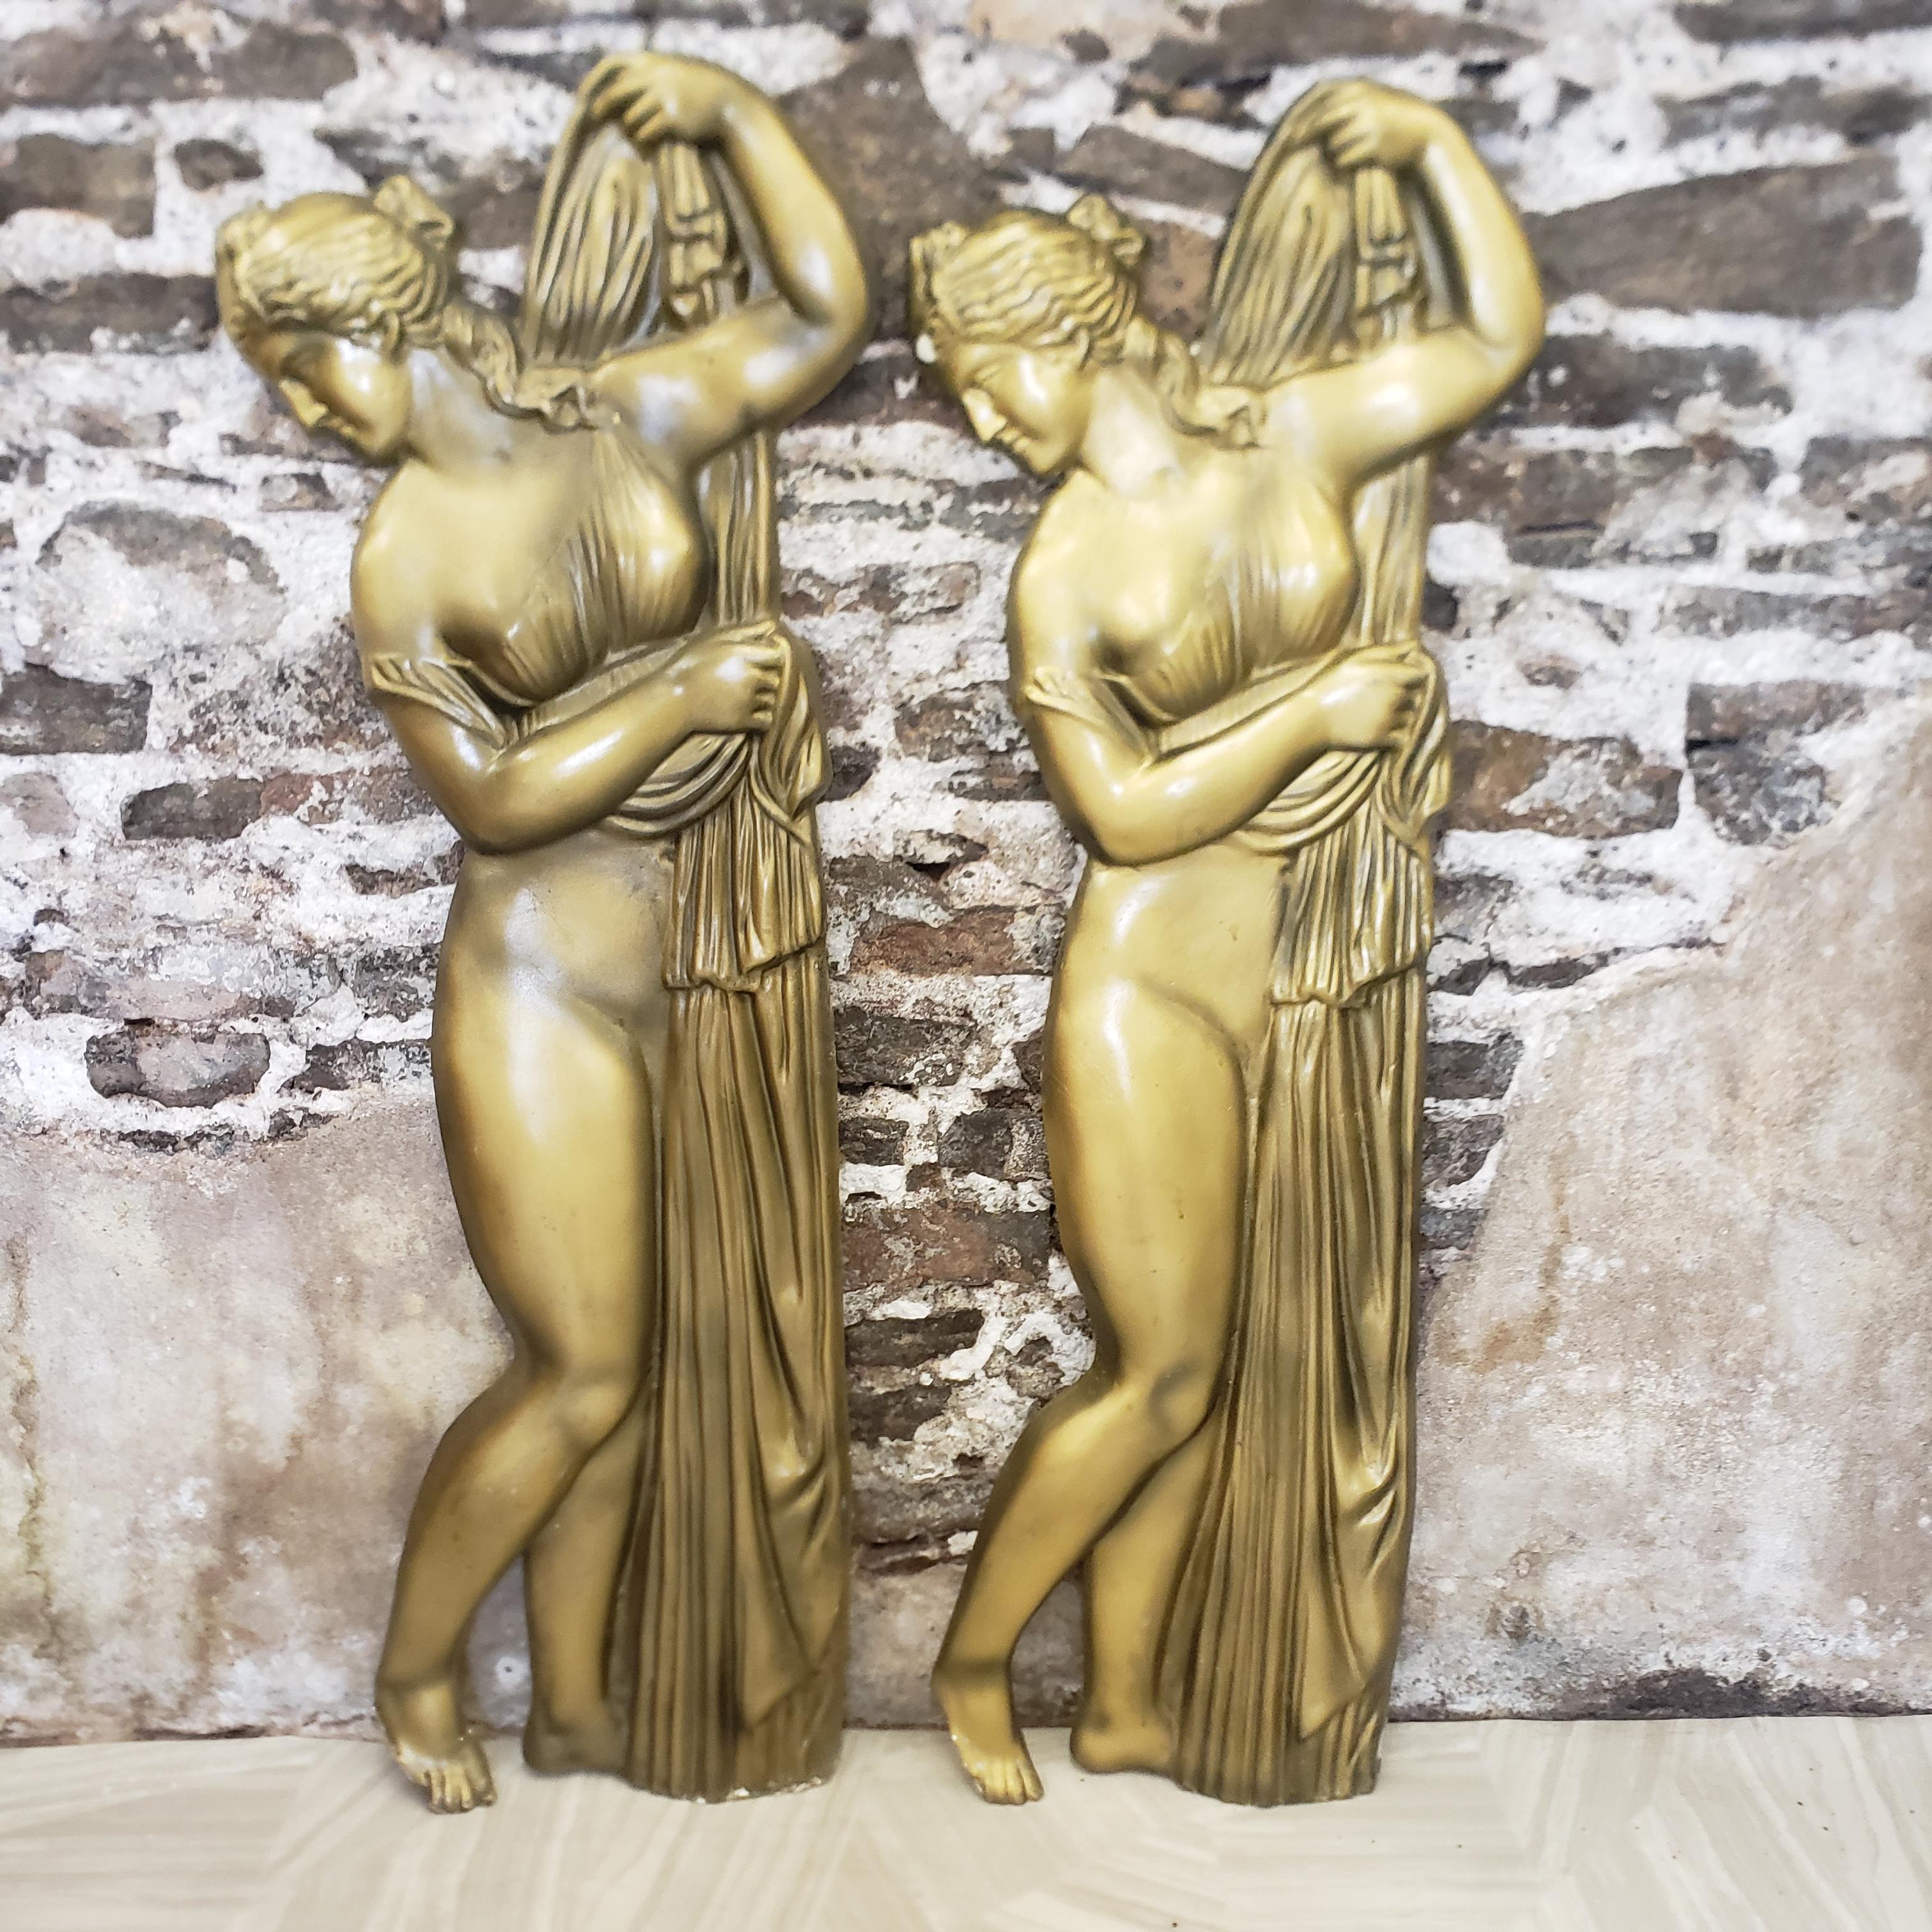 This mid-century era matched pair of molded fiberglass wall sculptures are unsigned, but presumed to have been made in Canada in approximately 1960 in a Neoclassical Revival style. The reliefs depict a pair of seminude young females with long